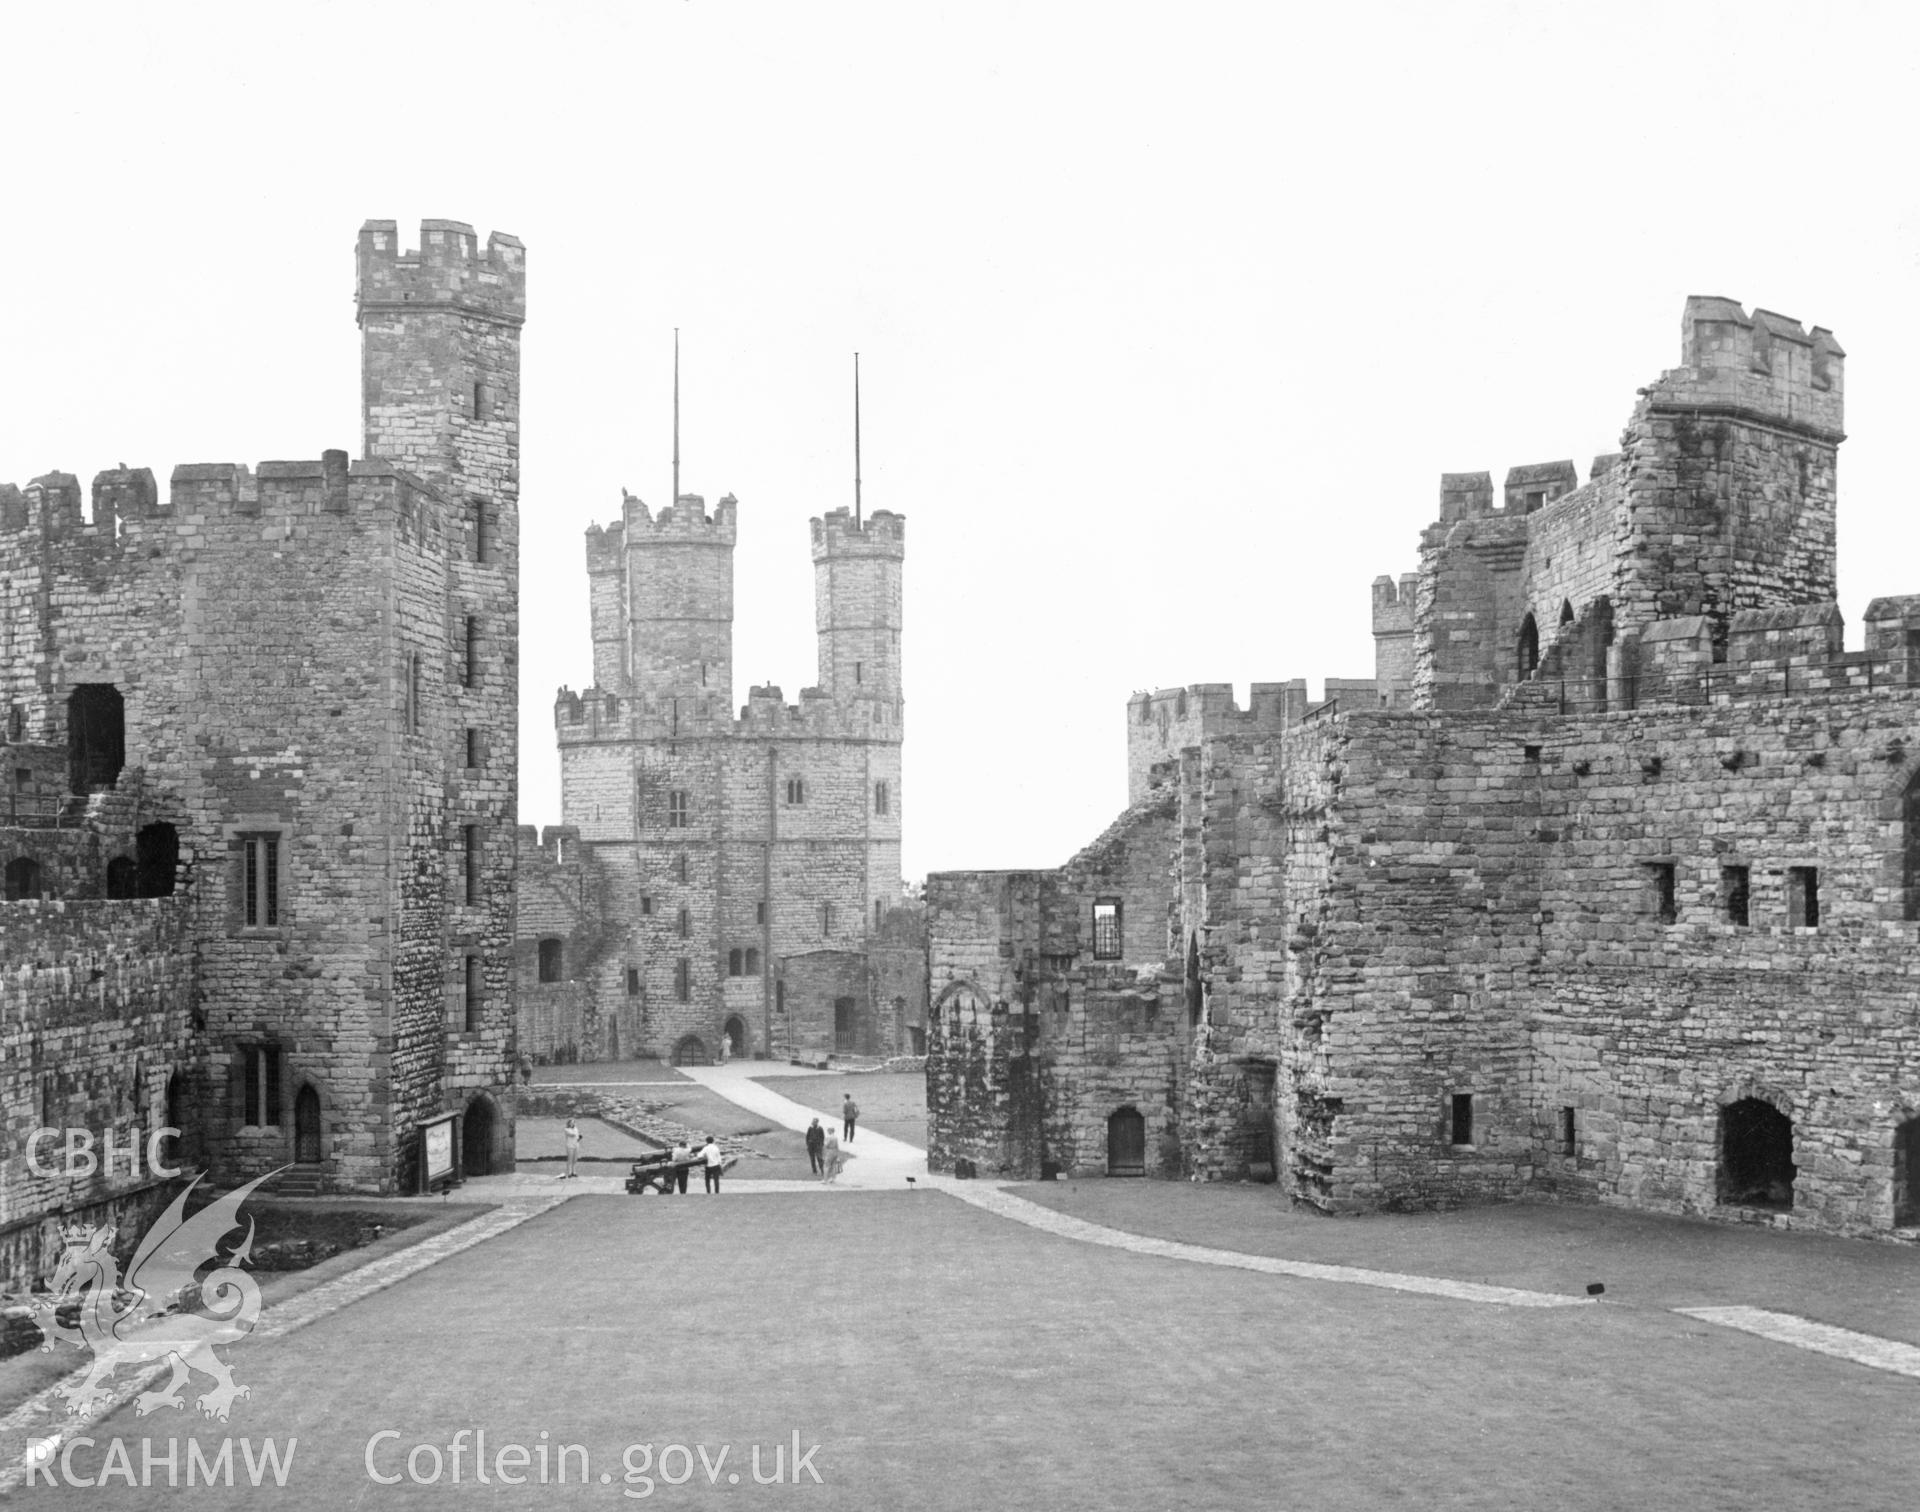 1 b/w print showing view of Caernarfon castle, collated by the former Central Office of Information.